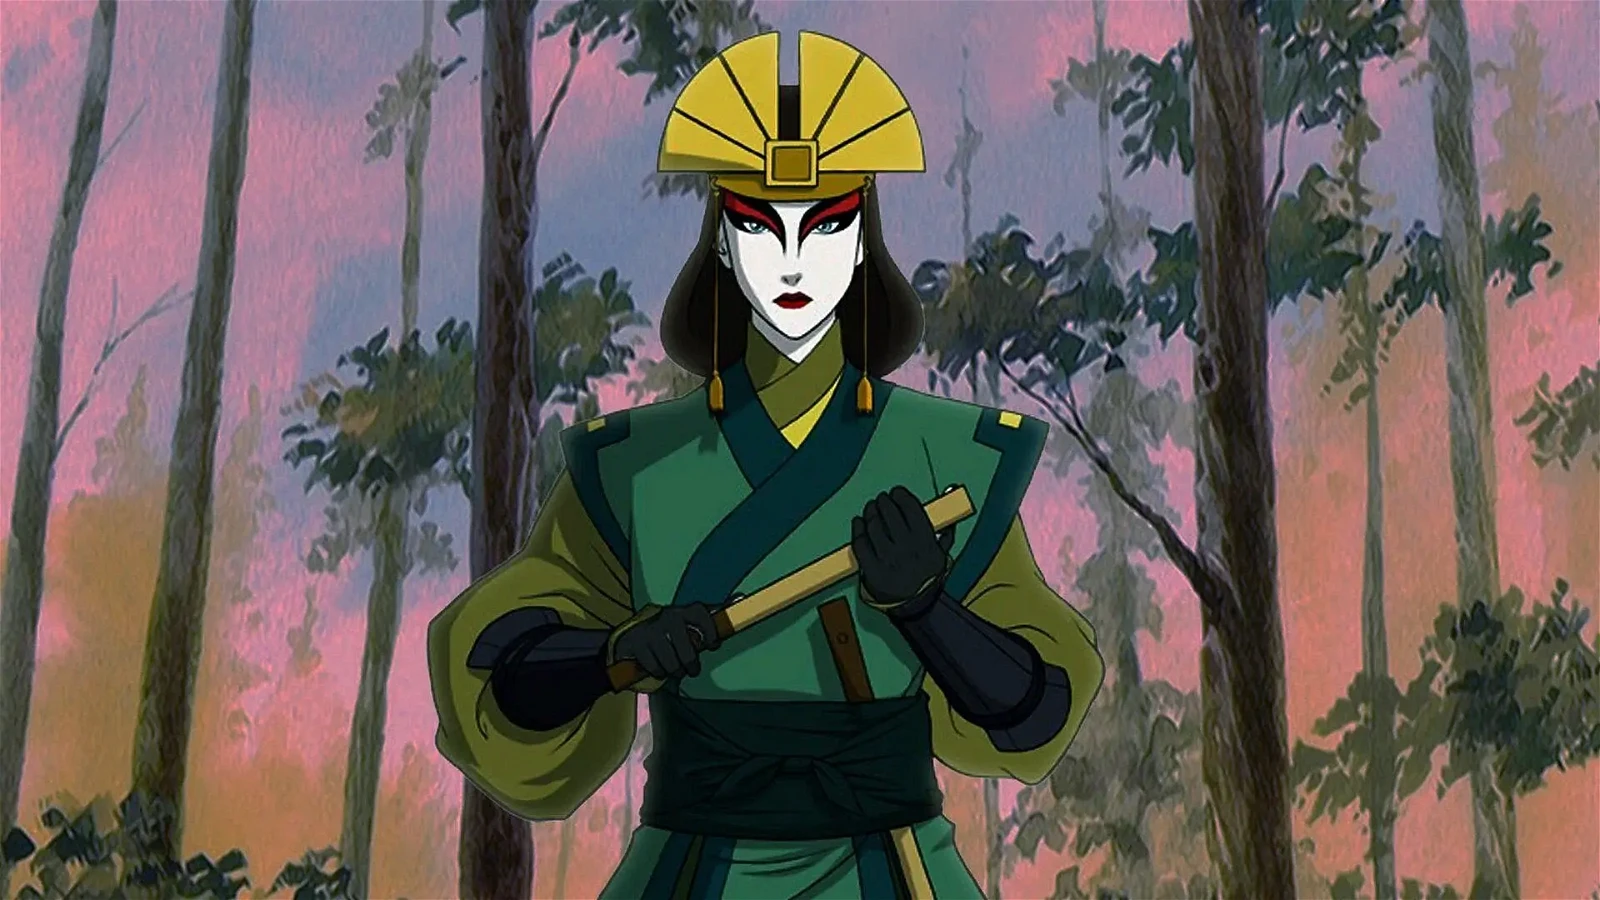 Kyoshi in the Avatar: The Last Airbender saga